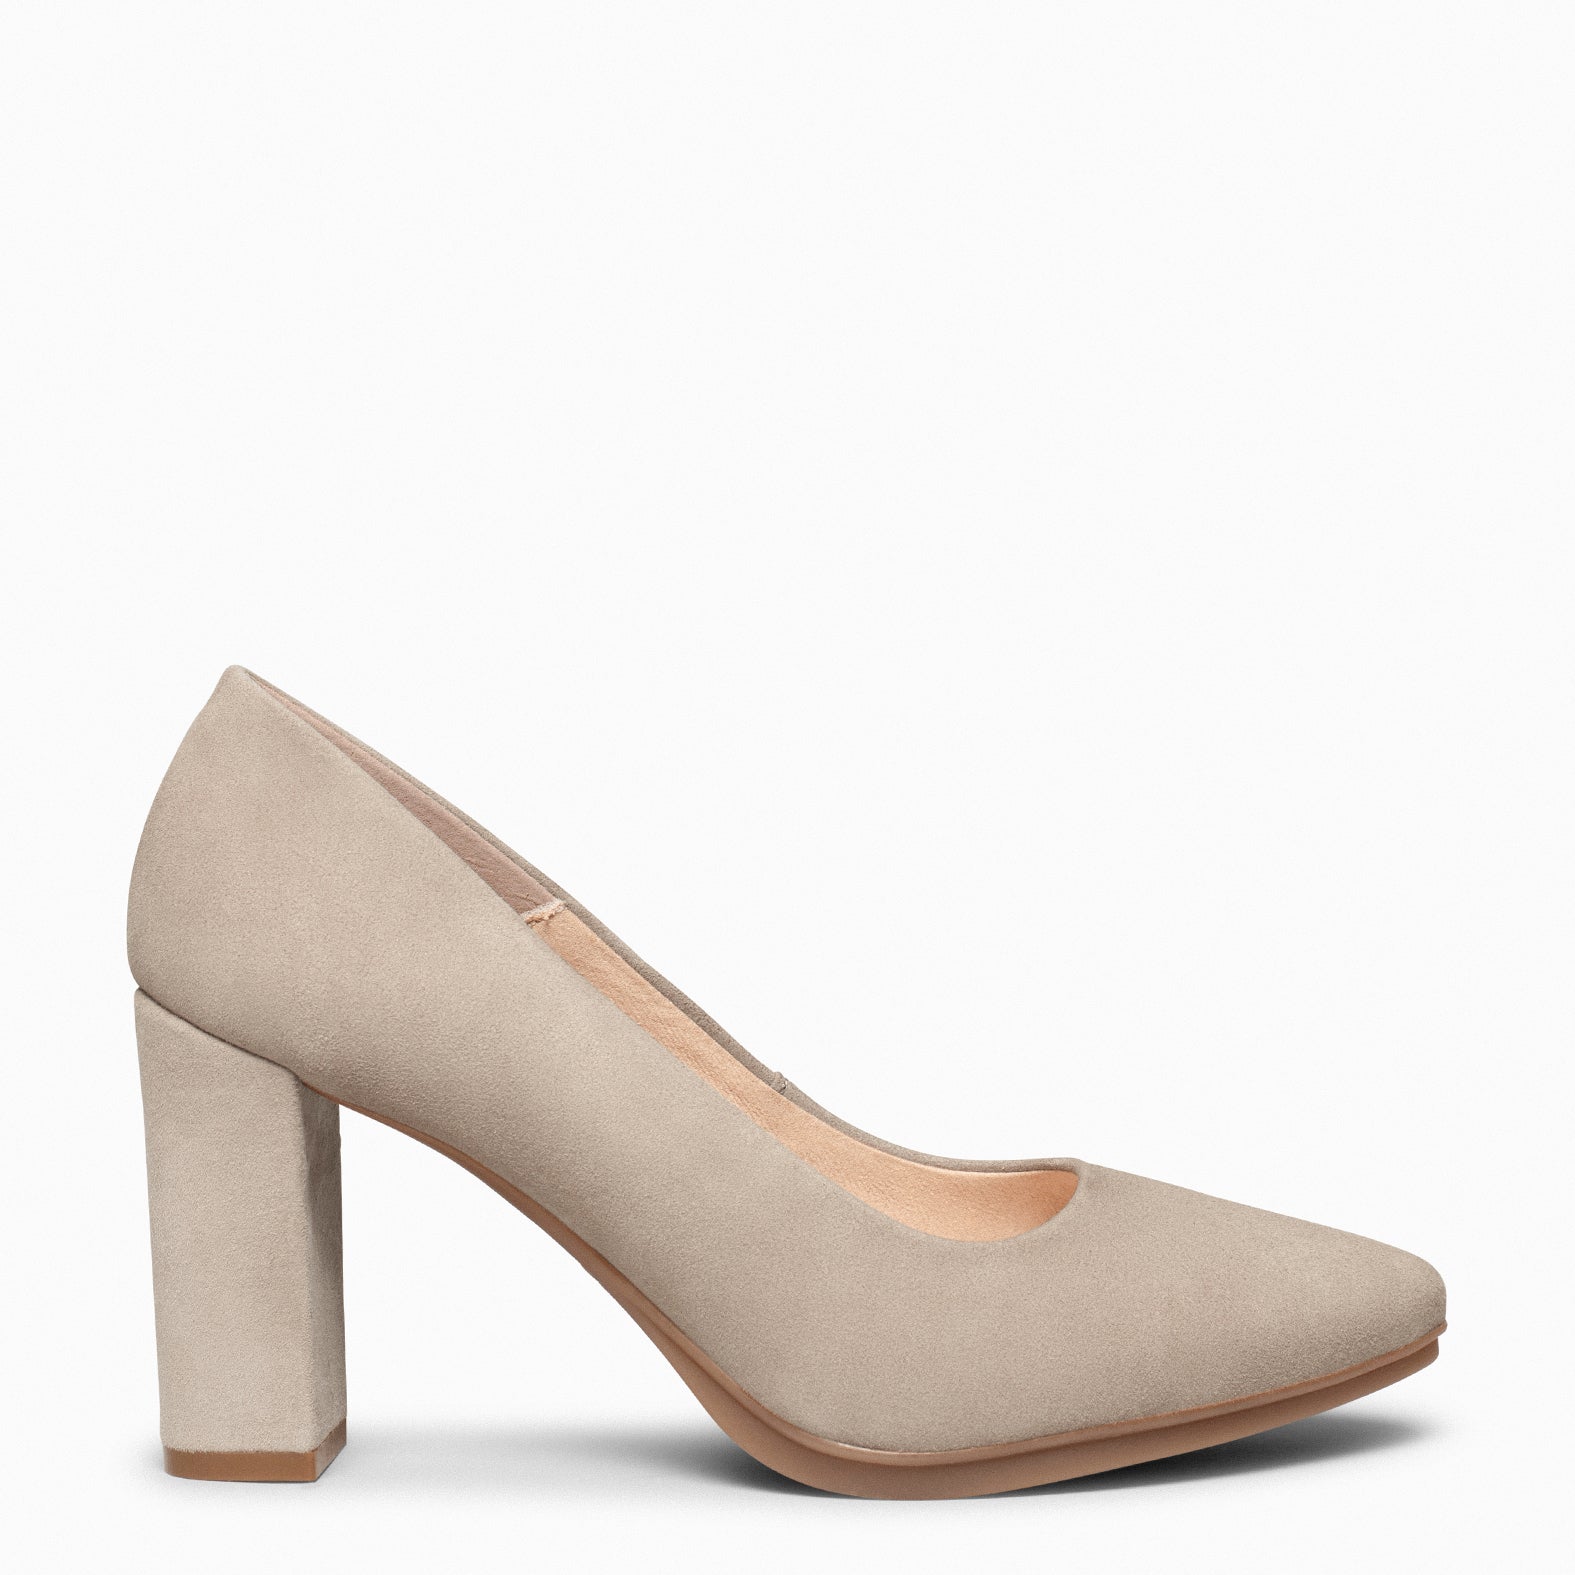 URBAN – TAUPE Suede high-heeled shoes 